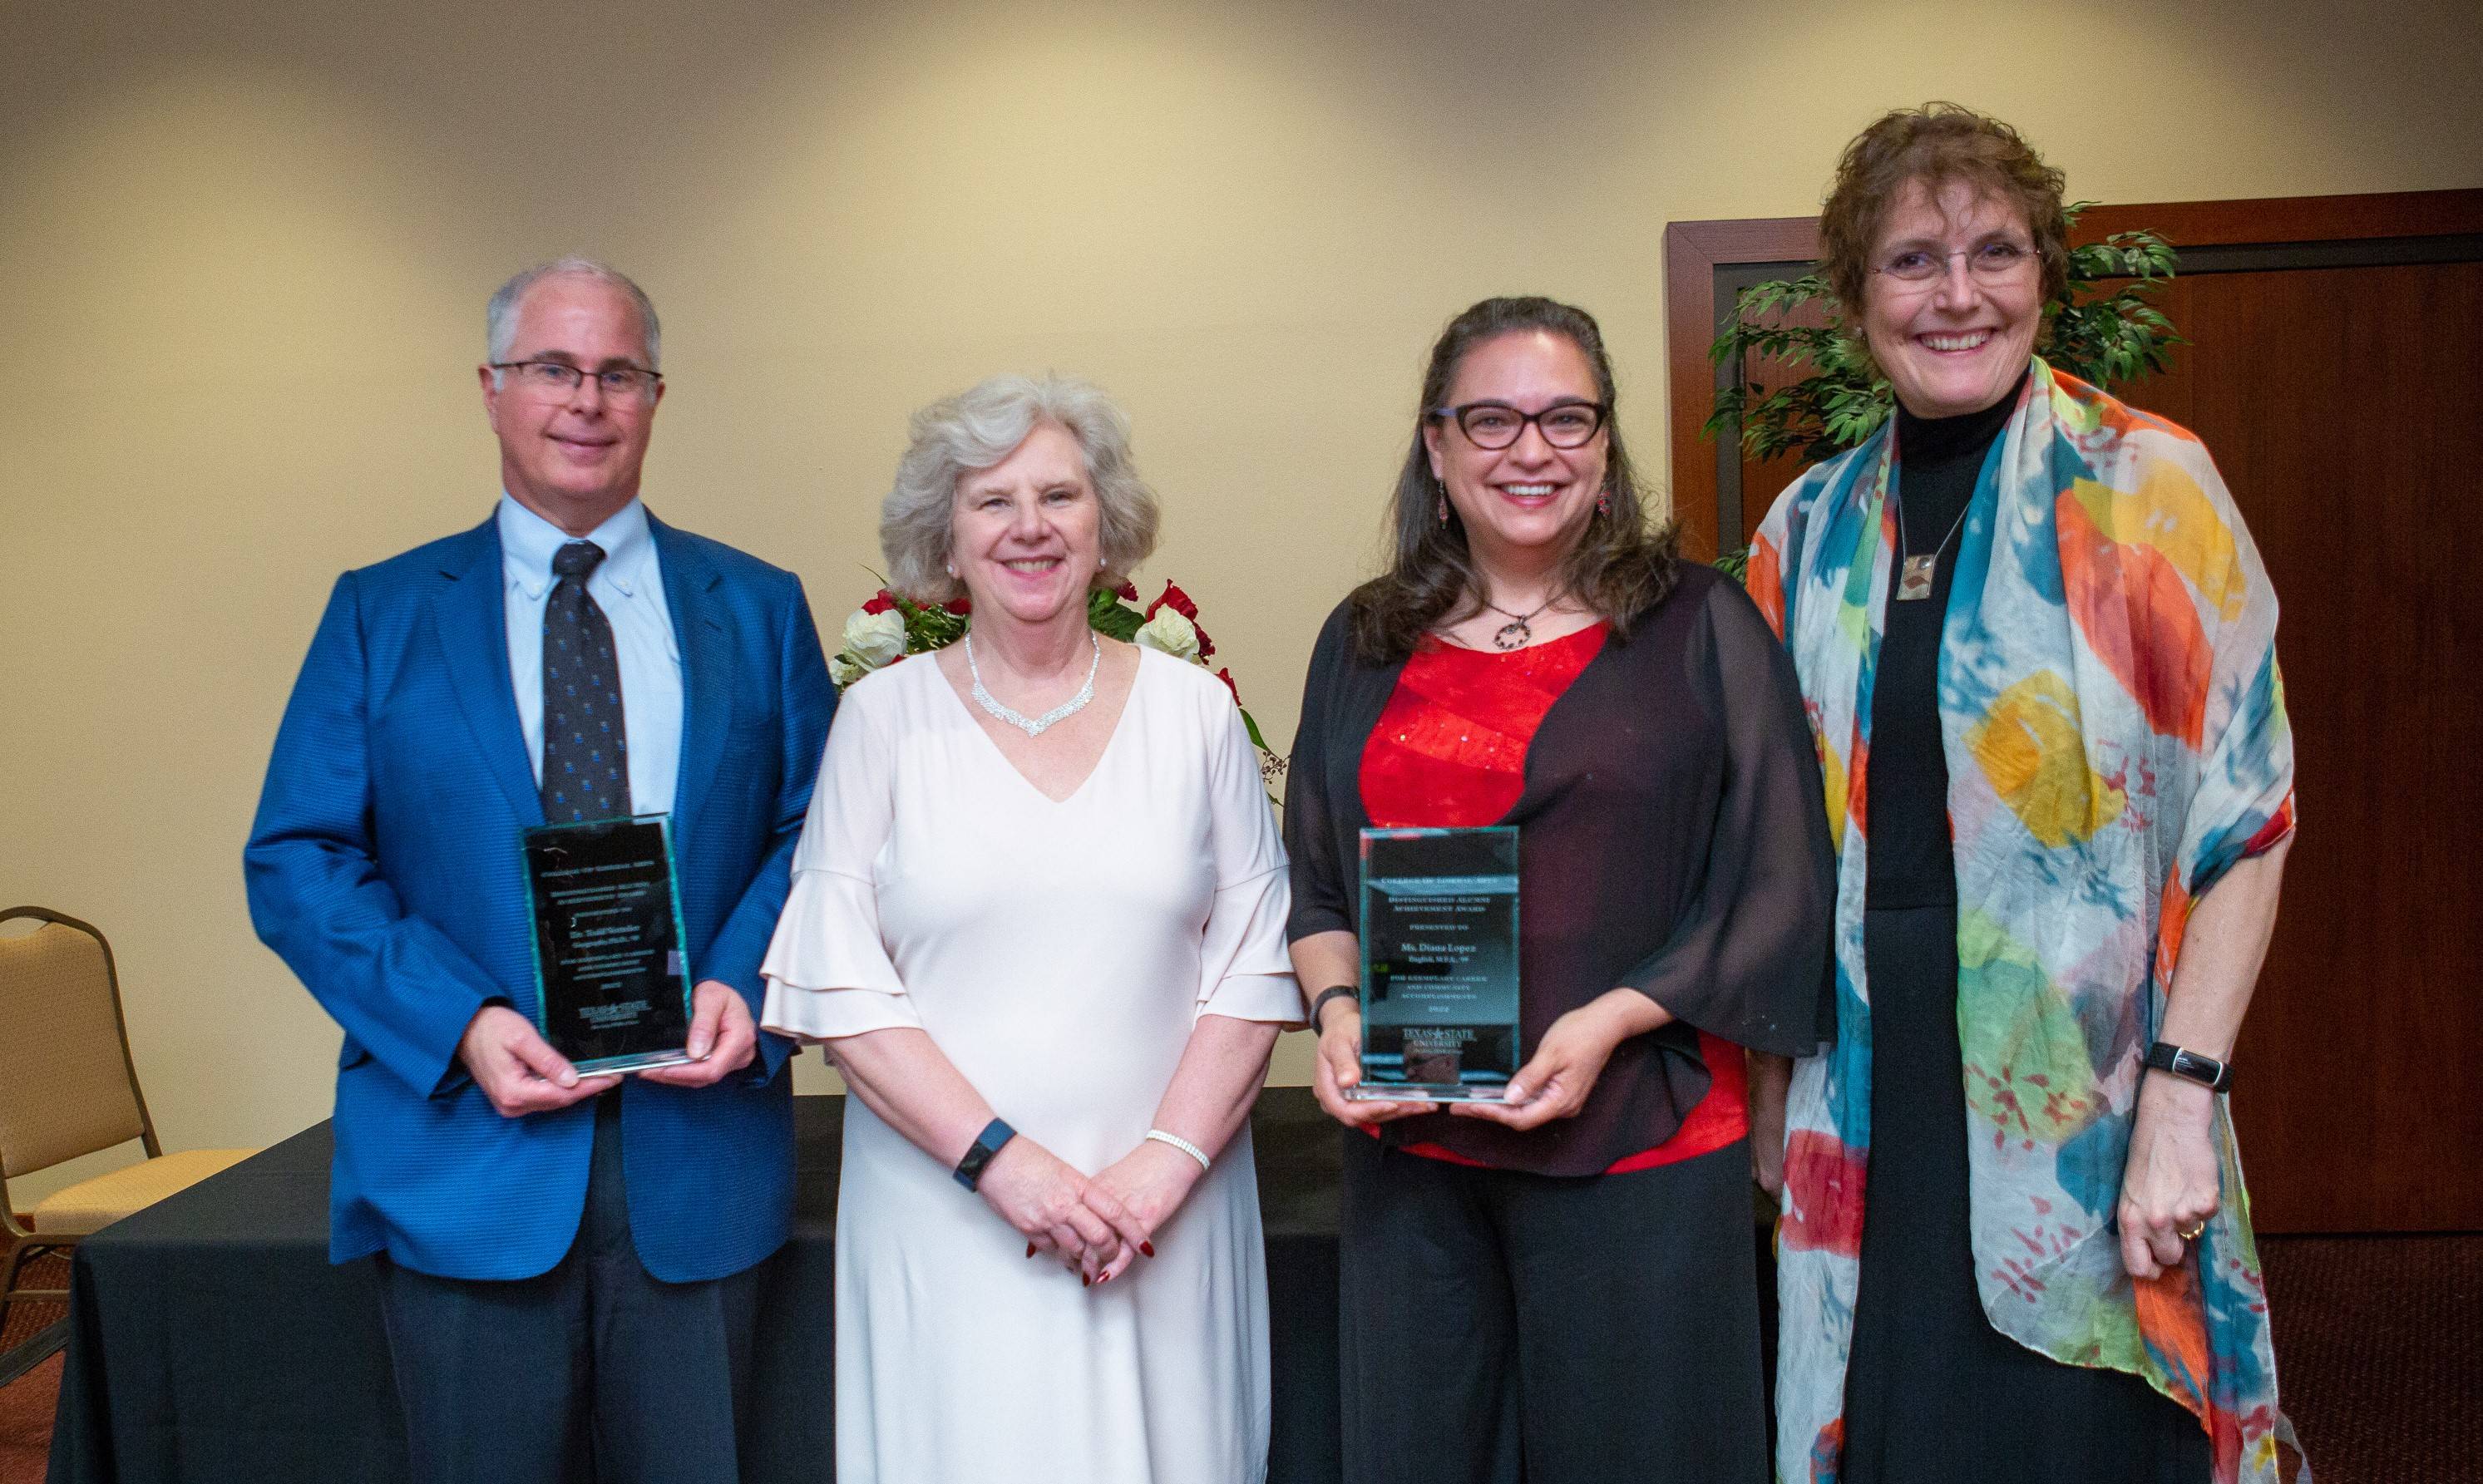 Photo of 2022 distinguished alumni honorees with Dean Brennan and Dr. Golato